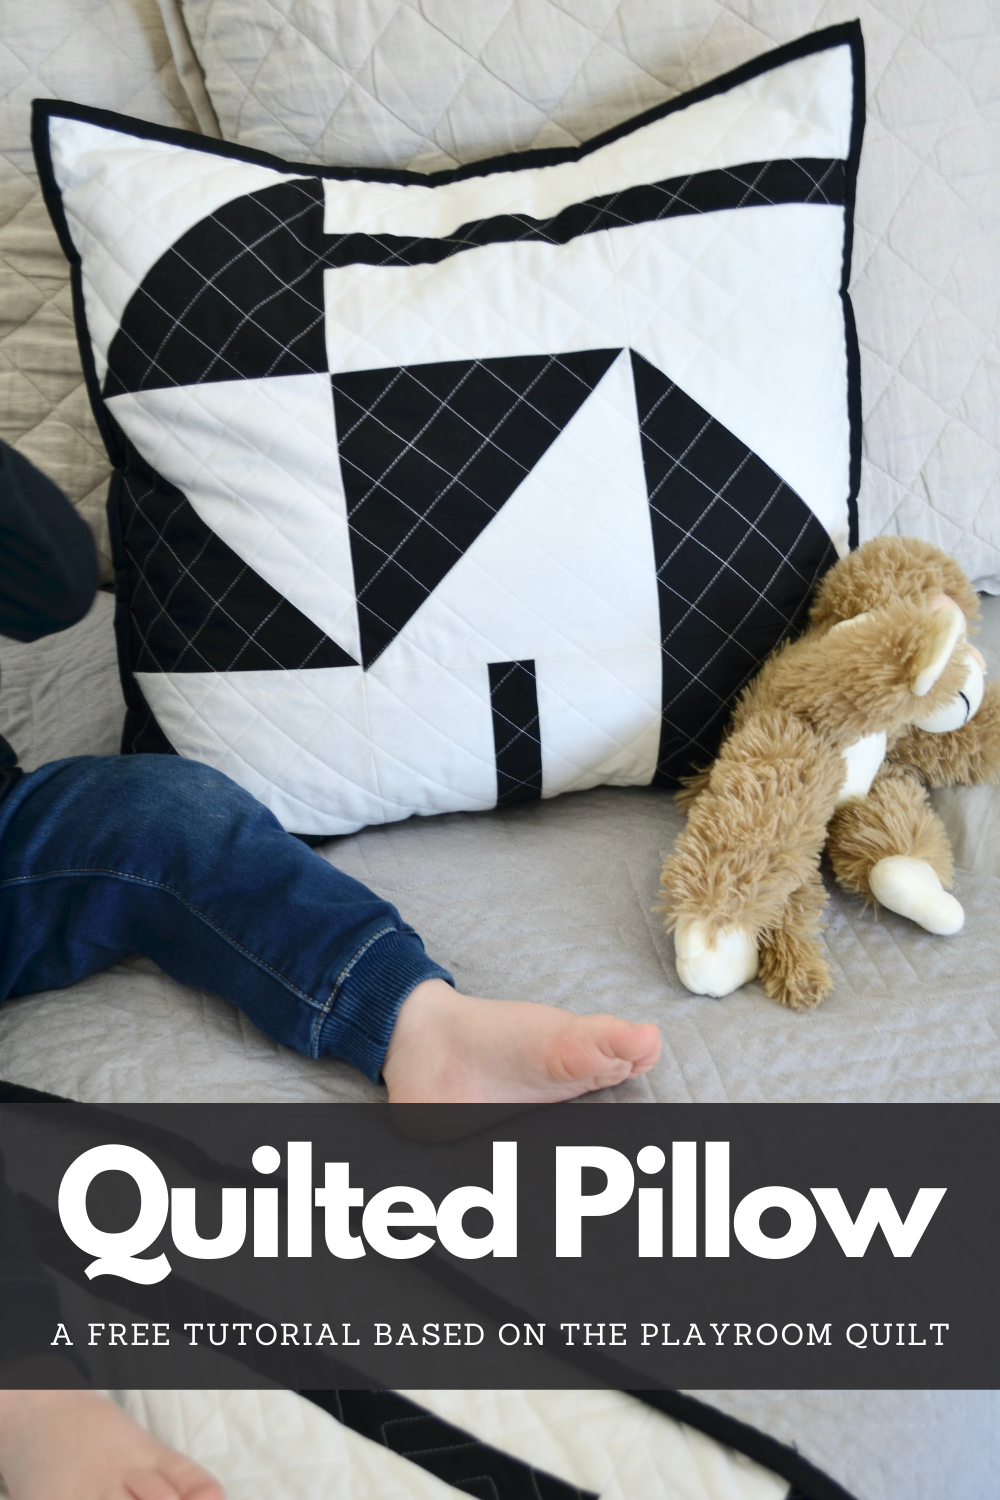 Free Playroom Quilted Pillow Pattern – Sewn Modern Quilt Patterns by Amy  Schelle